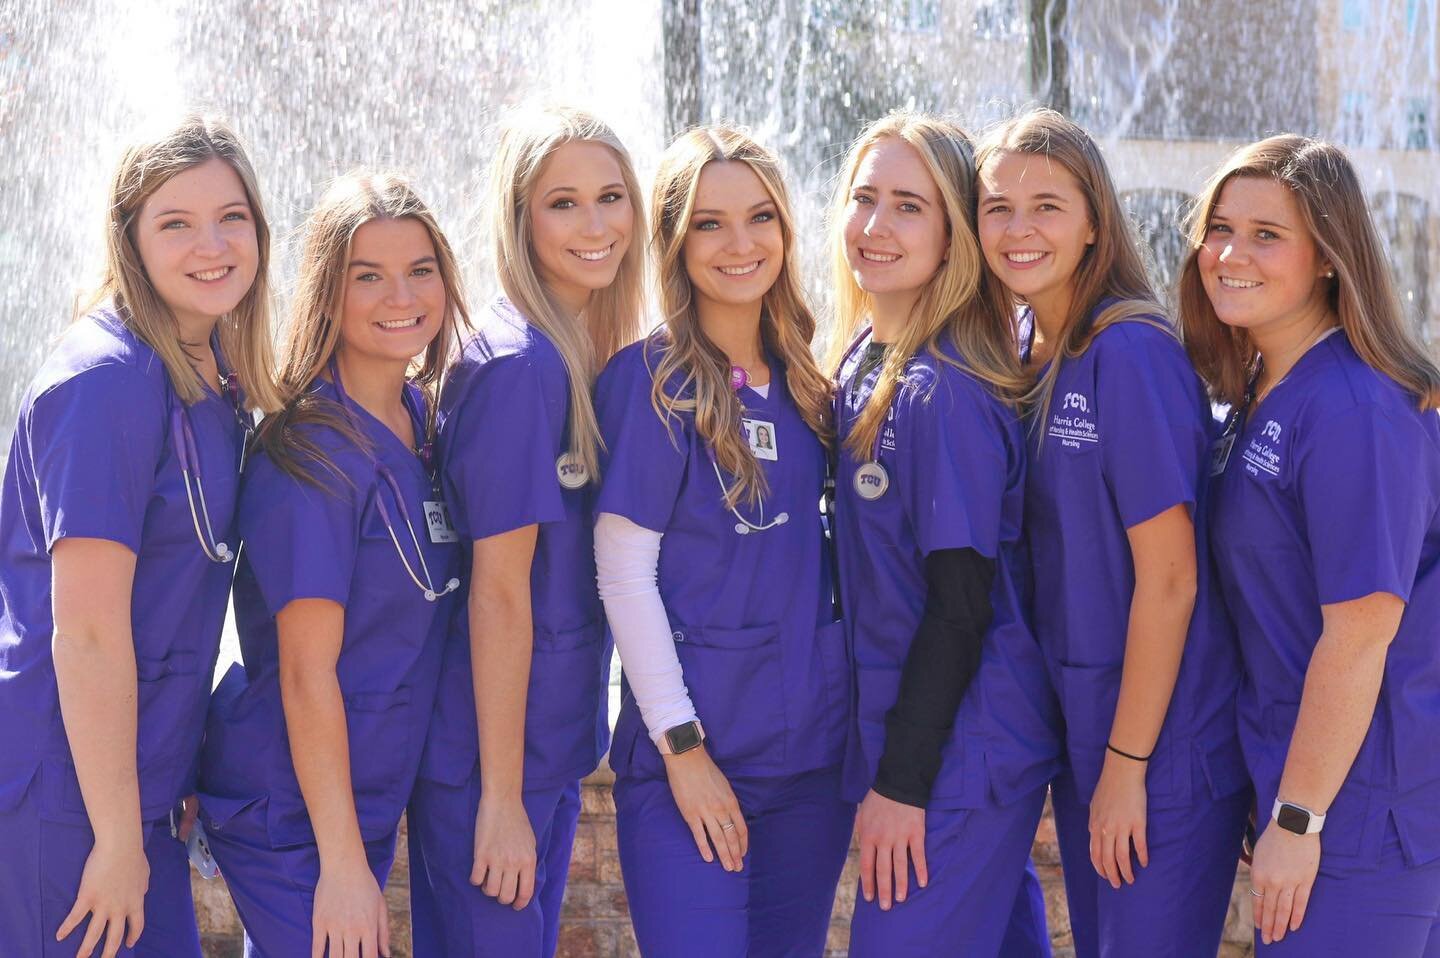 congrats to the Soph II students for getting their scrubs!! keep up the hard work📚🩺